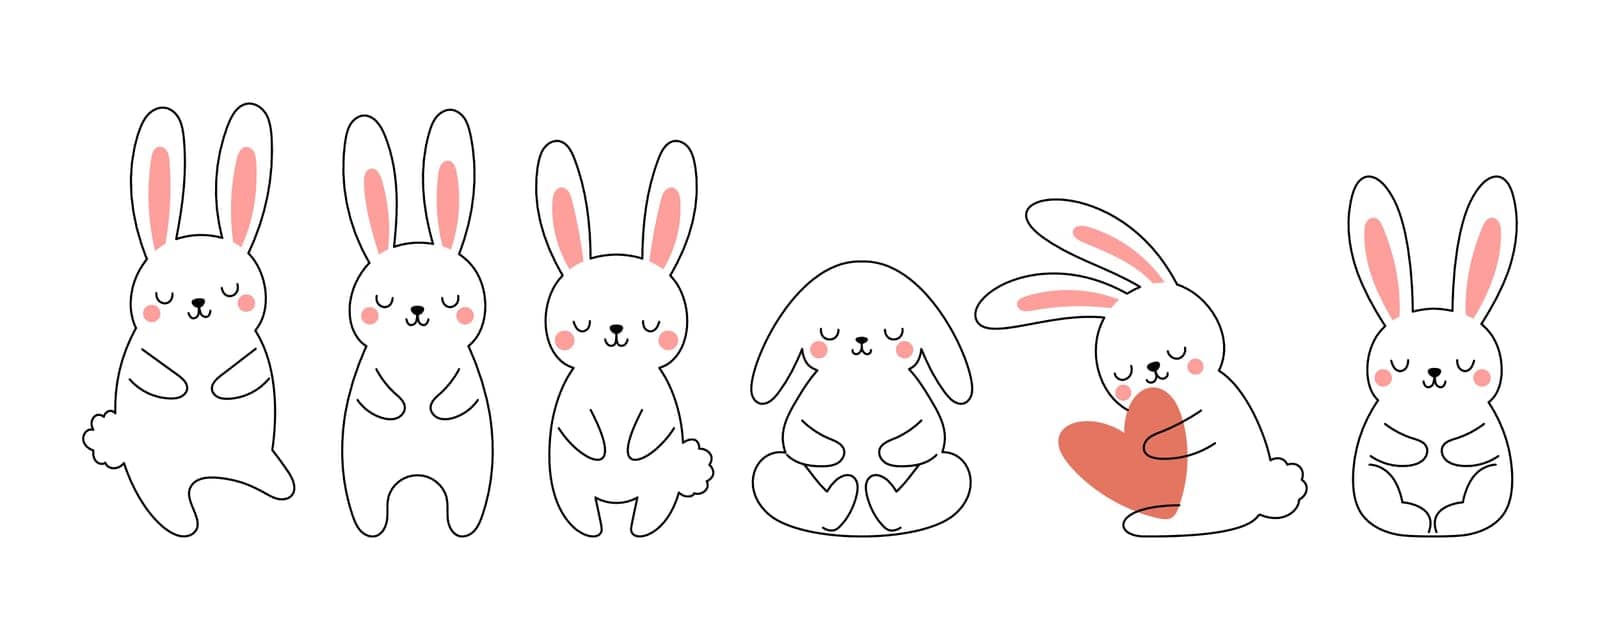 Cute little Easter bunny outline sketch collection in different poses. Cartoon rabbit character for kids cards, baby shower, invitation, poster. Vector stock illustration by Melnyk